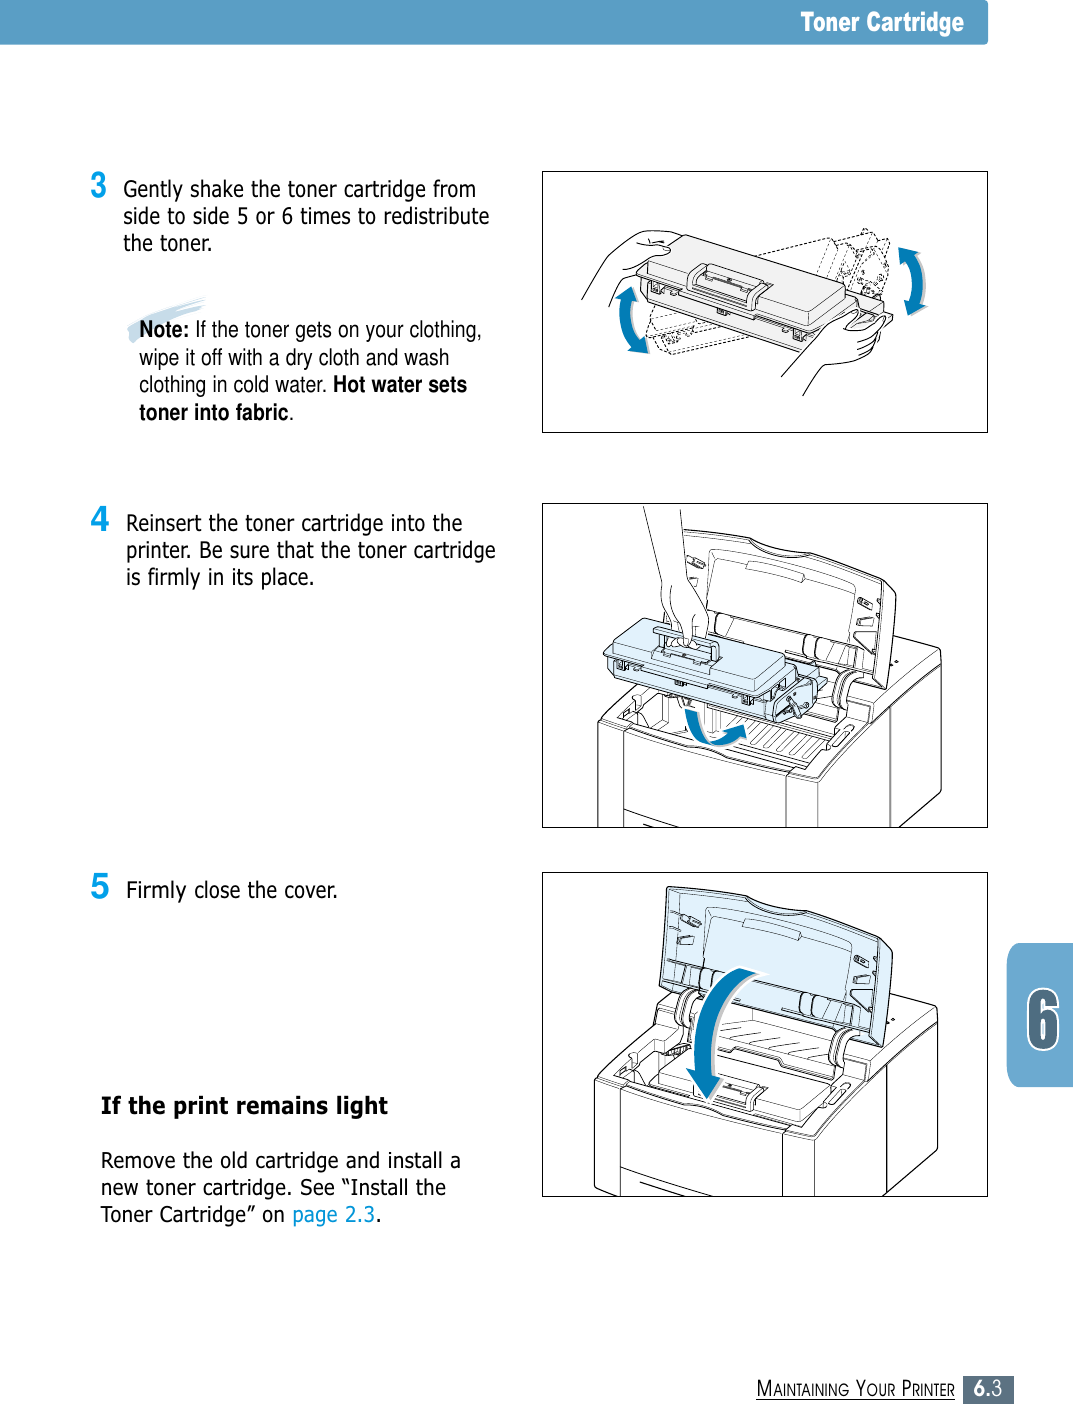 6.3MAINTAINING YOUR PRINTERToner Cartridge3Gently shake the toner cartridge fromside to side 5 or 6 times to redistributethe toner.4Reinsert the toner cartridge into theprinter. Be sure that the toner cartridgeis firmly in its place.5Firmly close the cover.If the print remains light Remove the old cartridge and install anew toner cartridge. See “Install theToner Cartridge” on page 2.3.Note: If the toner gets on your clothing,wipe it off with a dry cloth and washclothing in cold water. Hot water setstoner into fabric.